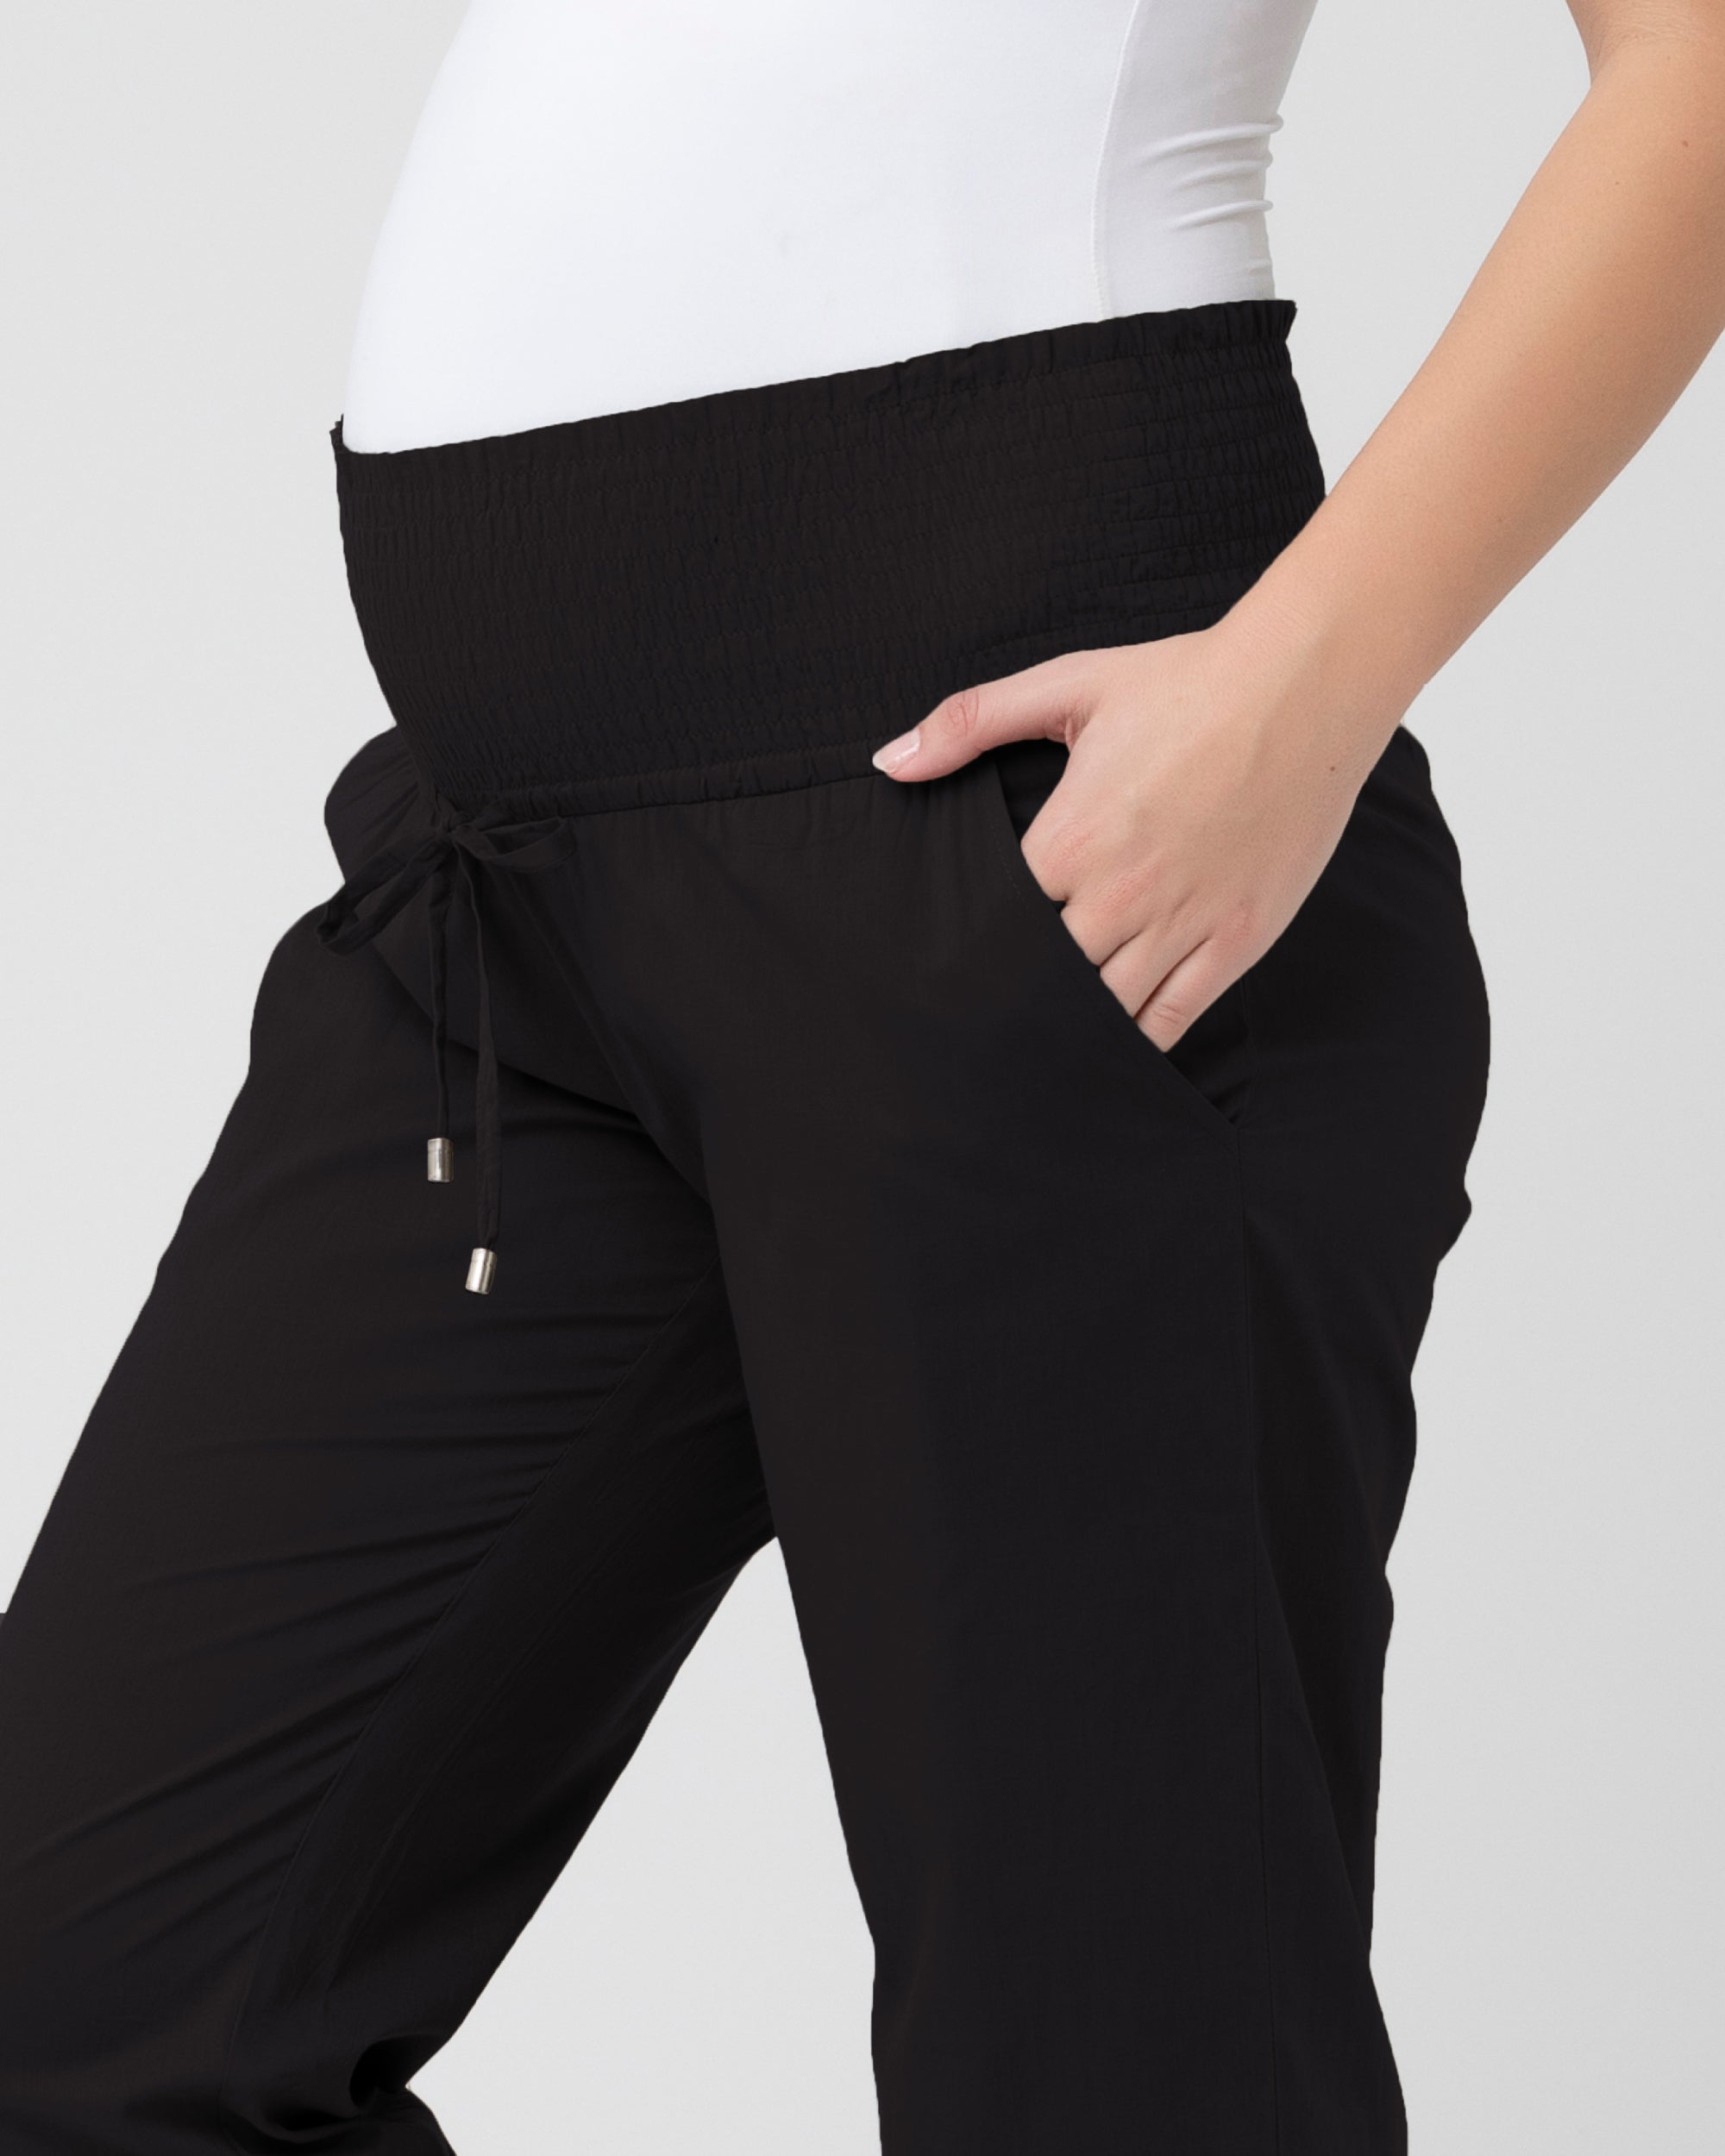 Philly Cotton Pant Black